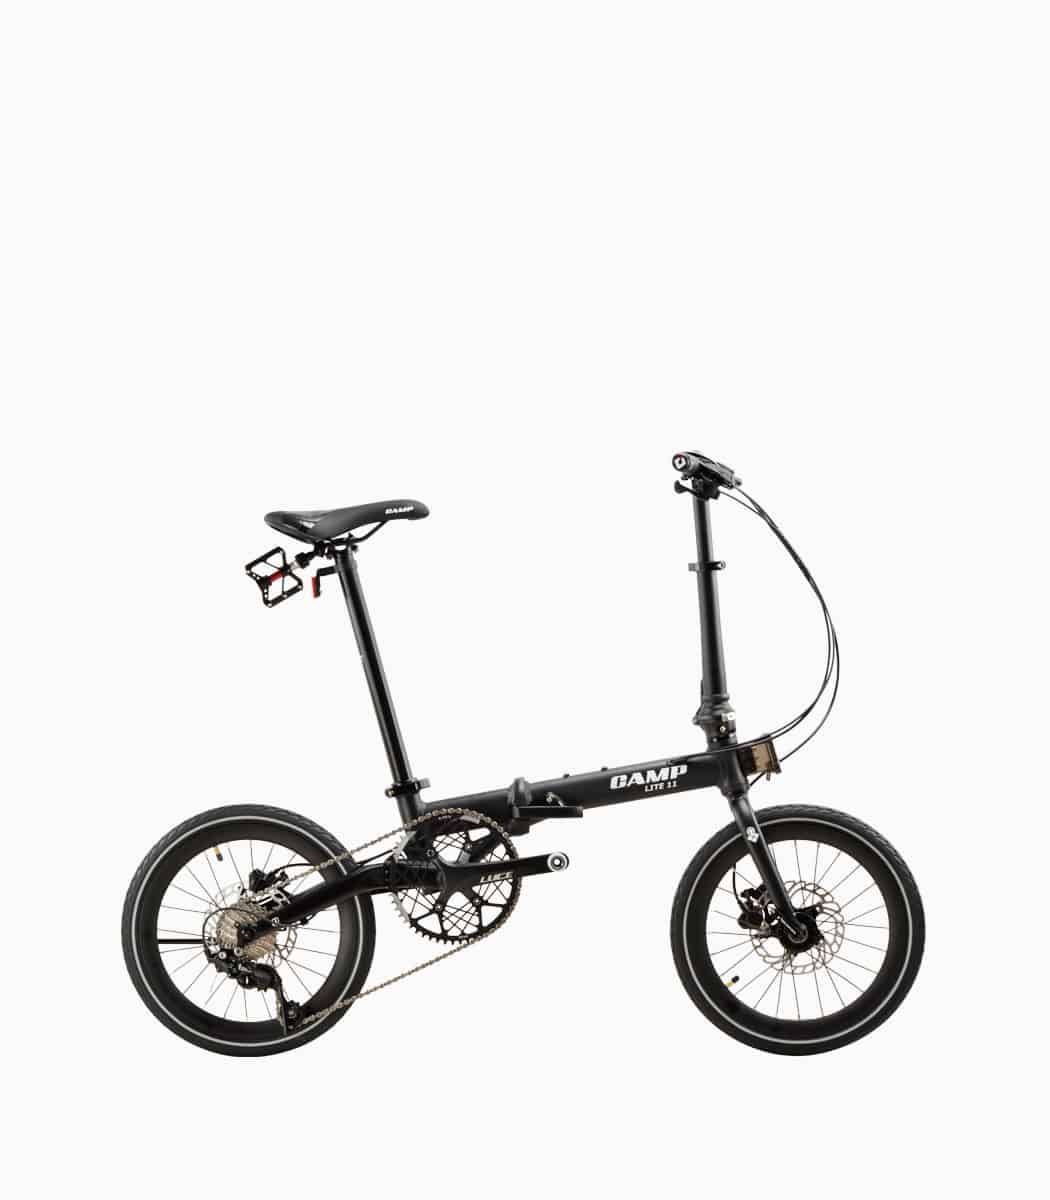 CAMP Lite 11 (MATT BLACK) foldable bicycle with reflective tyres right